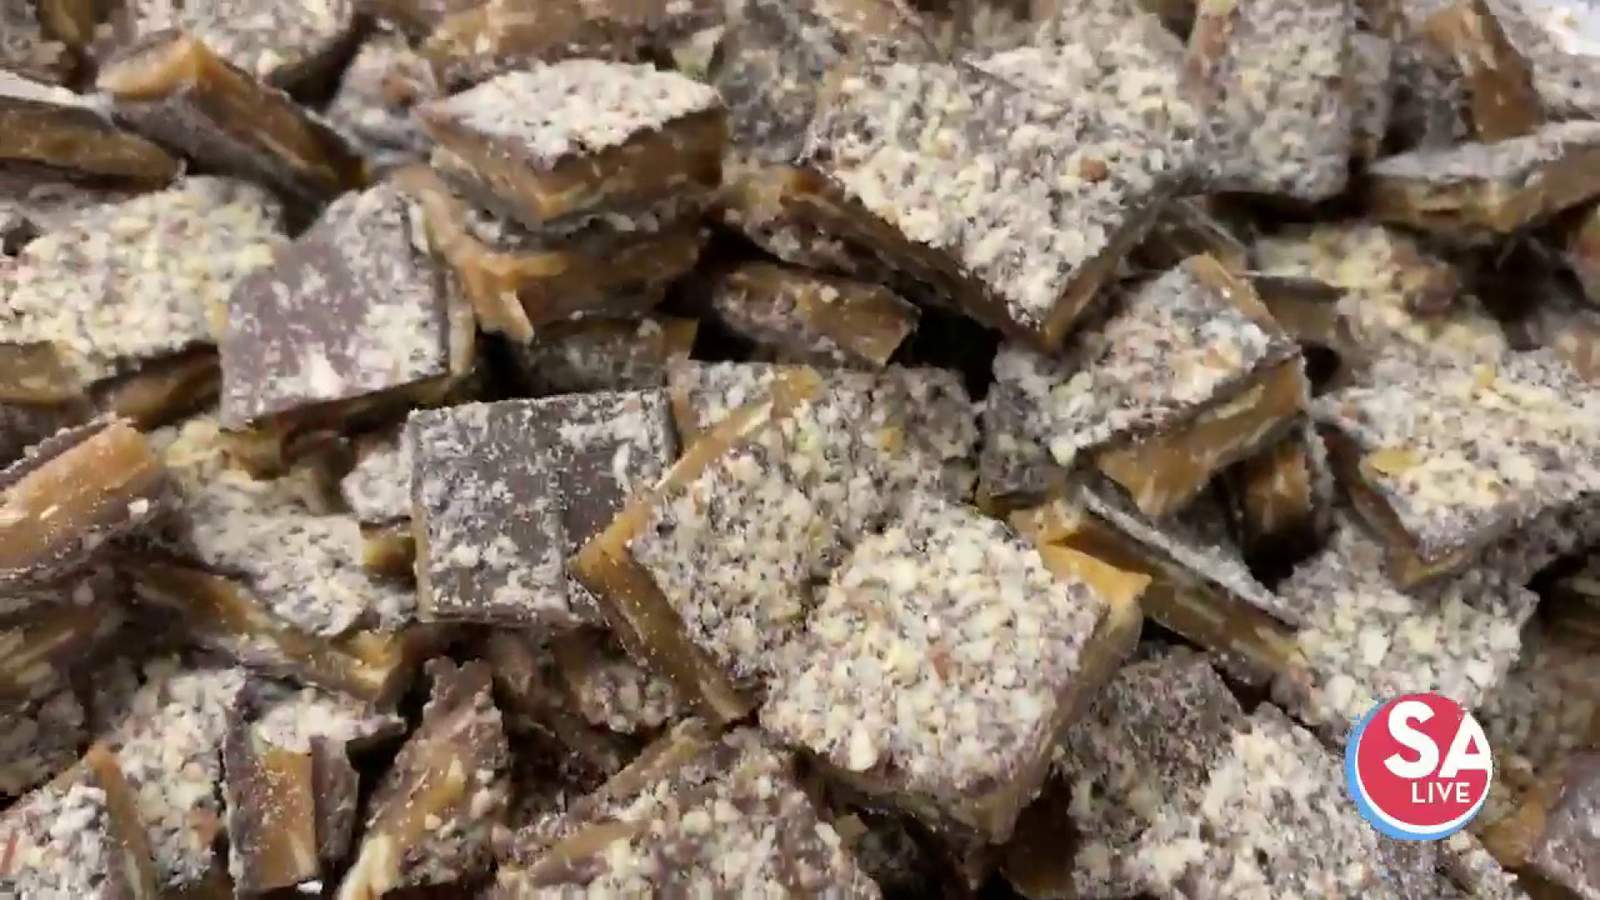 Local Toffee company whipping up homemade batches